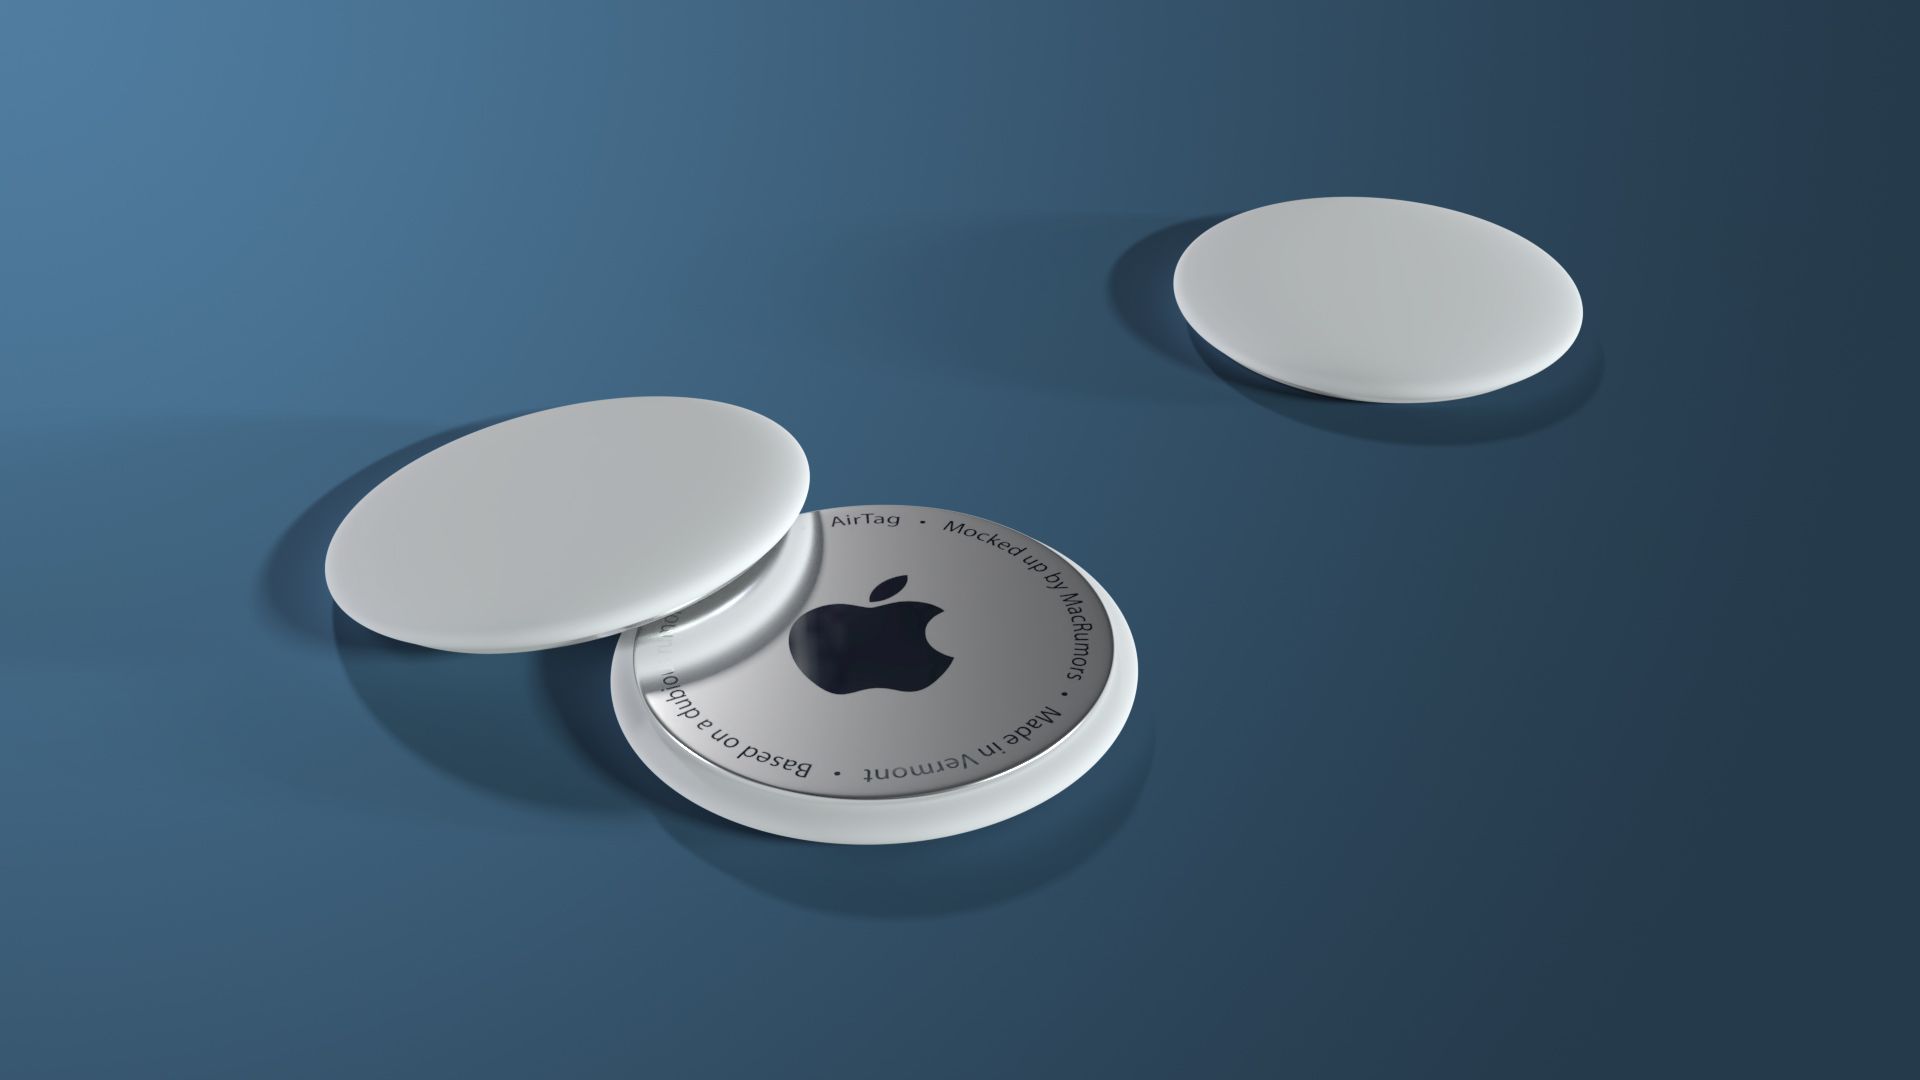 Kuo: Apple to Unveil AirTags, Augmented Reality Device, and More